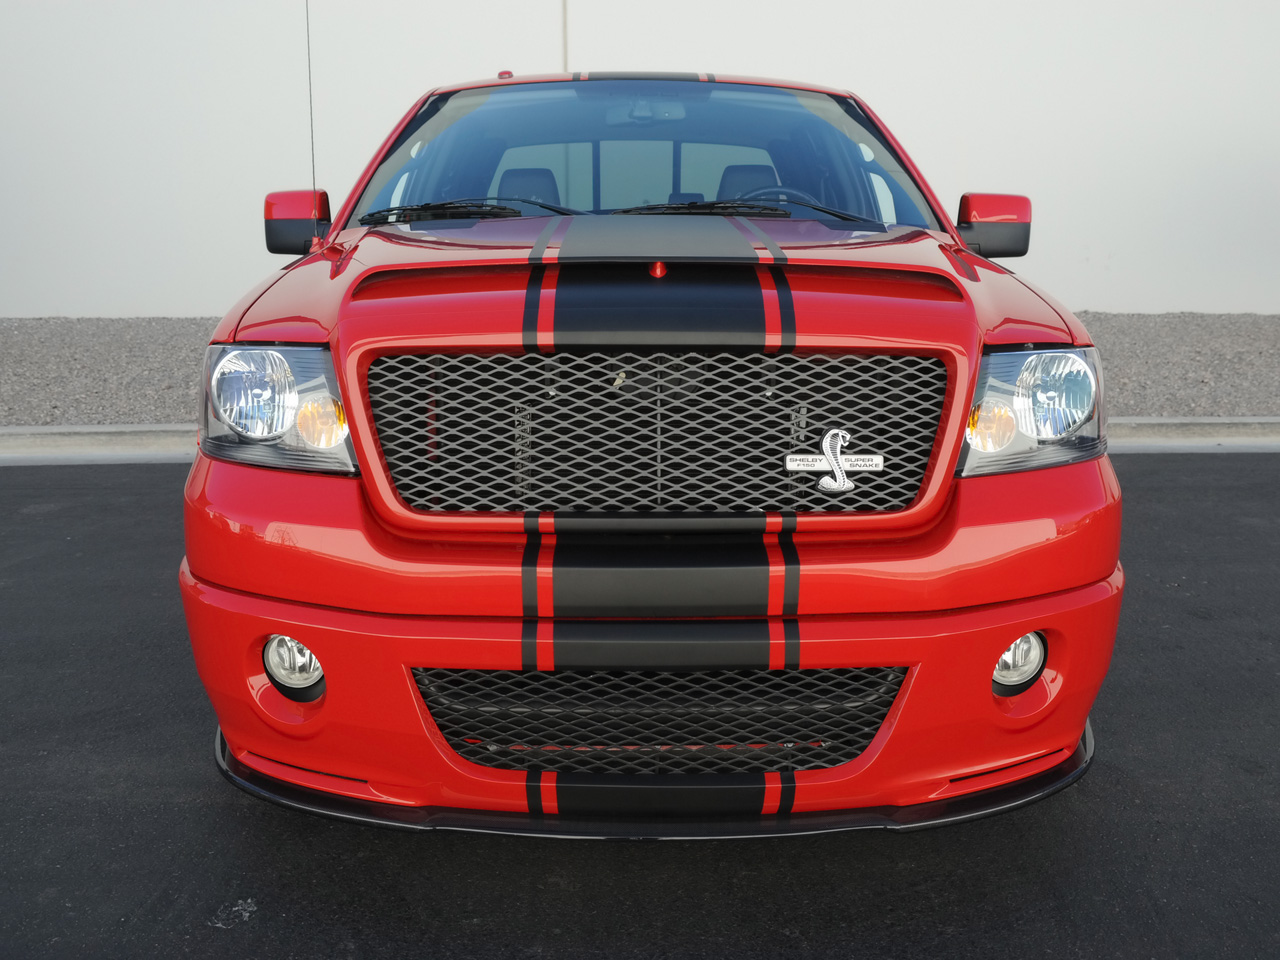 Ford F150 Shelby Super Snake 2009 - HD Wallpaper 